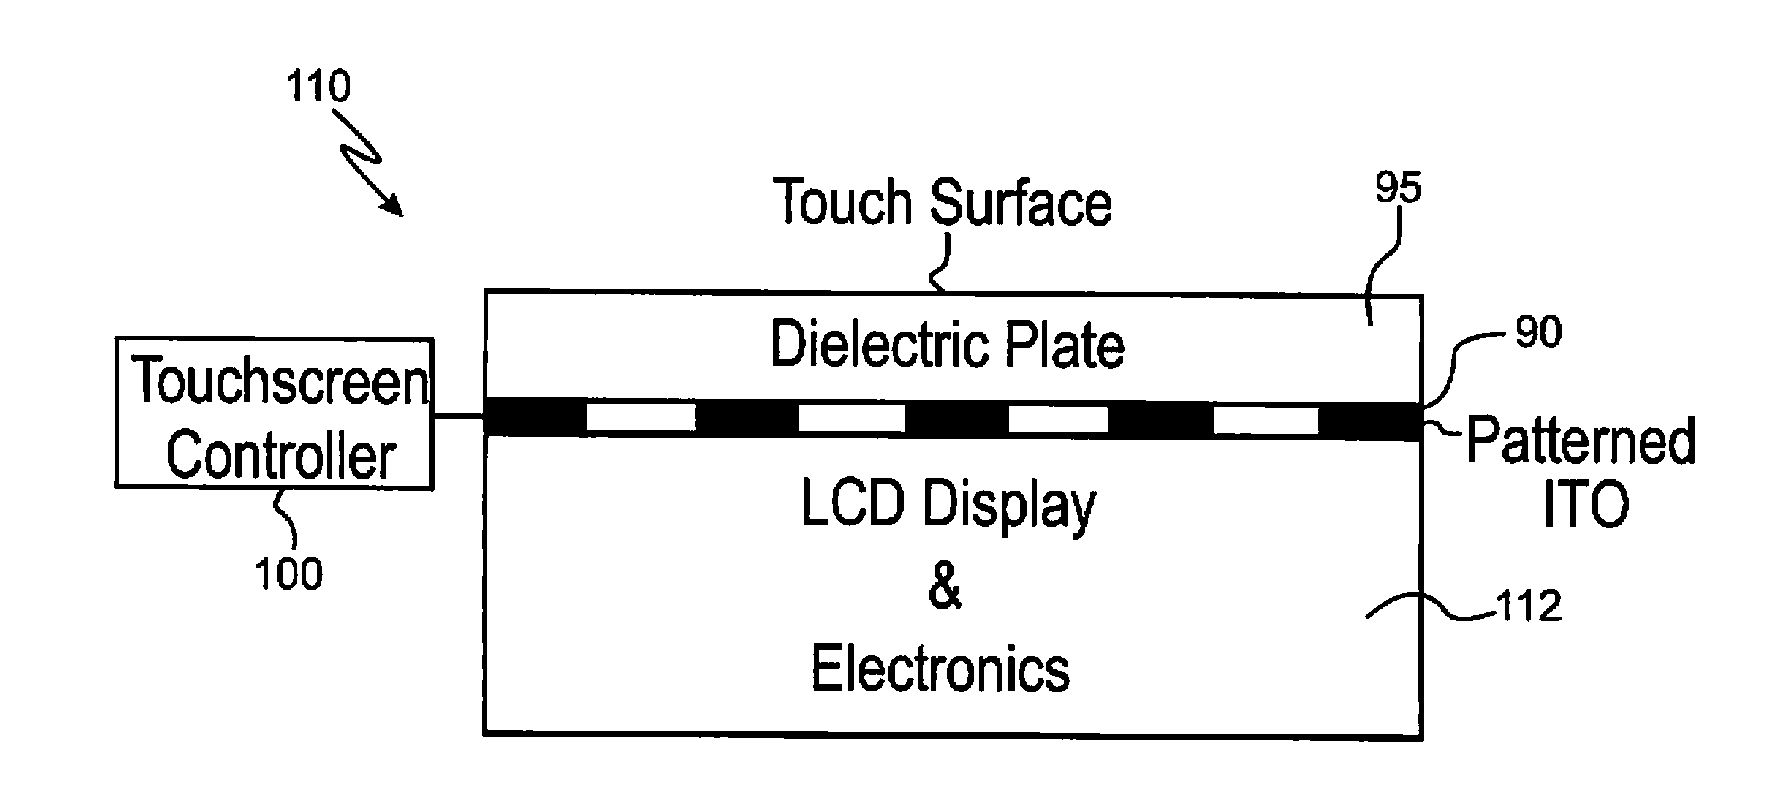 Noise Blanking for Capacitive Touch Displays